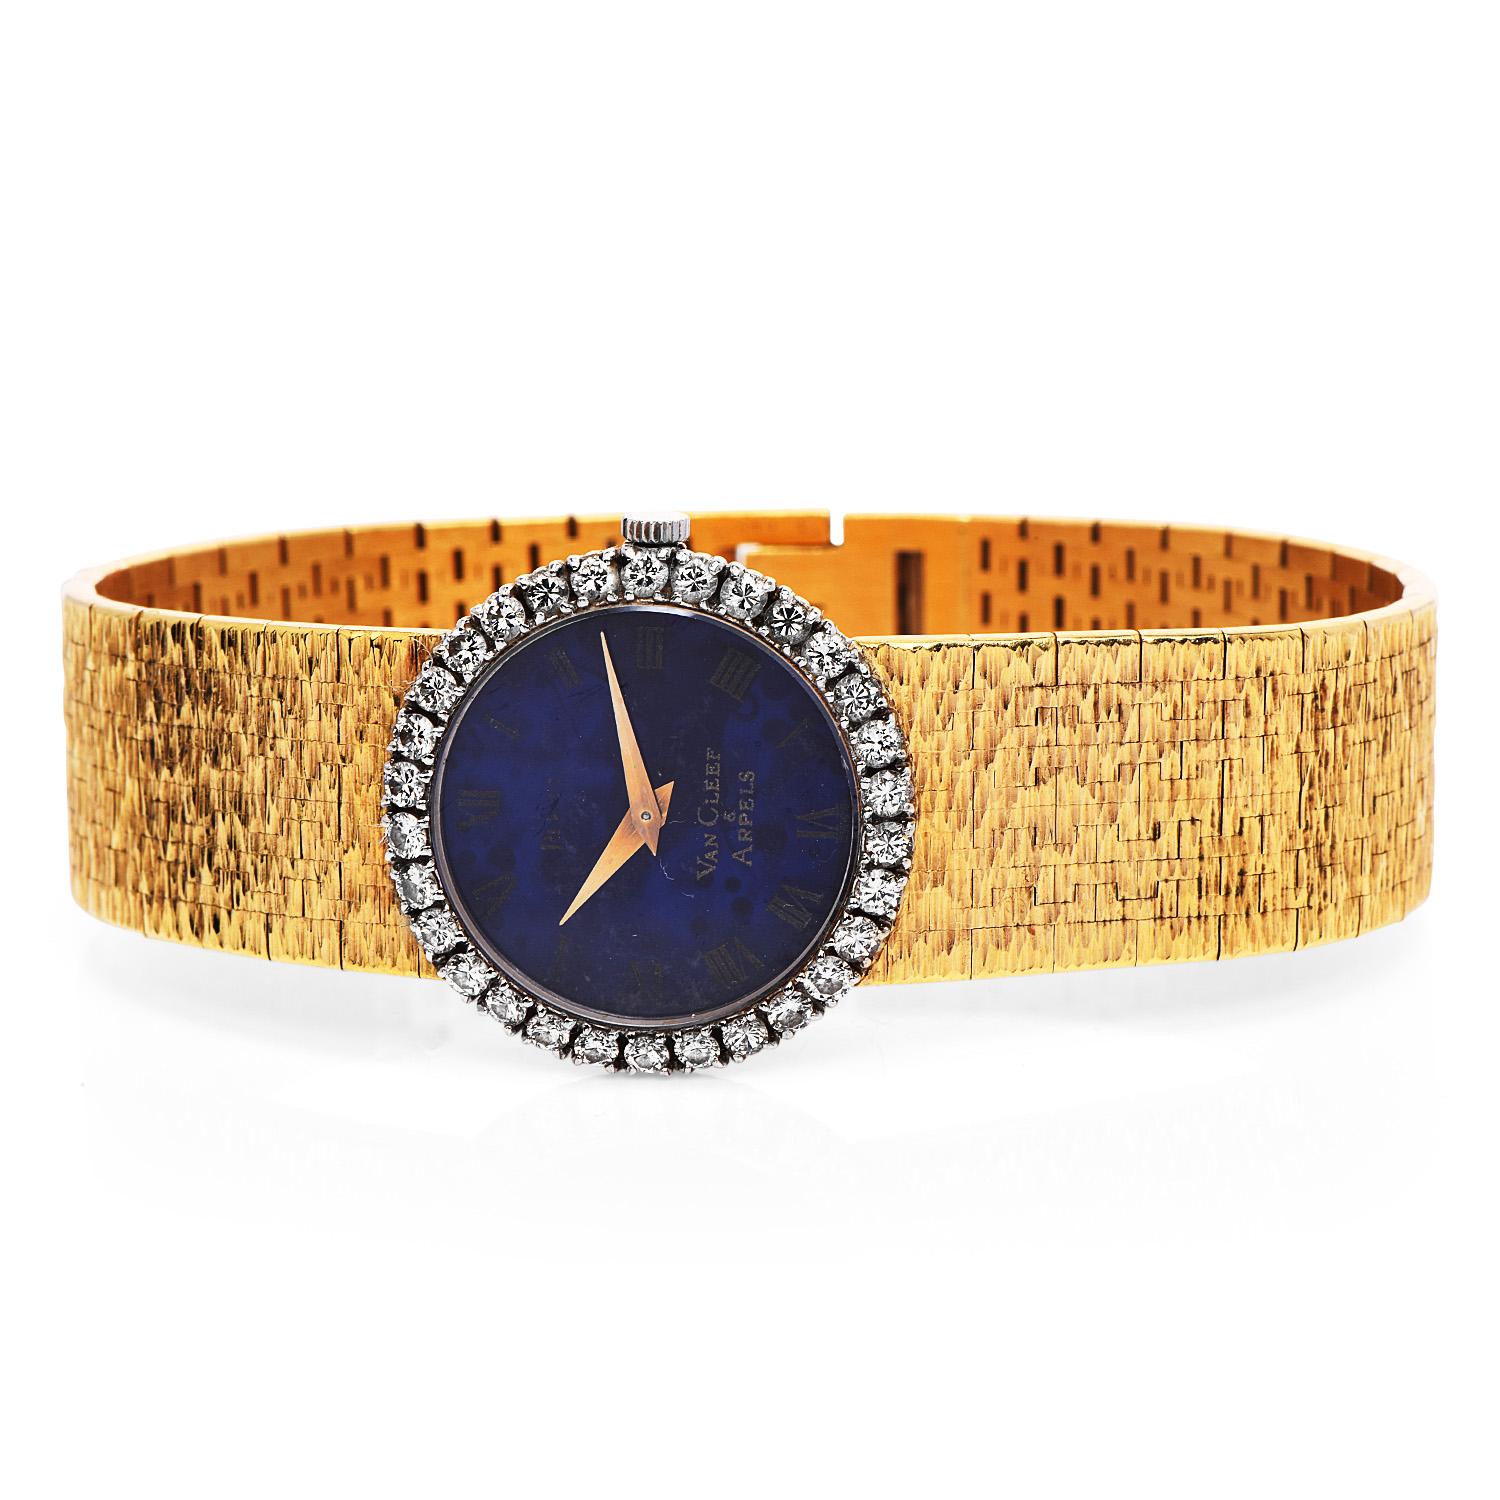 Two luxury houses joined in the 1970s to create this exquisite piece. This 1960s watch is Crafted in solid 18k  18K Yellow Gold, with a Diamond Bezel & authentic Lapis Lazuli Blue Dial.

With Factory set, 30 Round cut, prong-set genuine Diamonds,